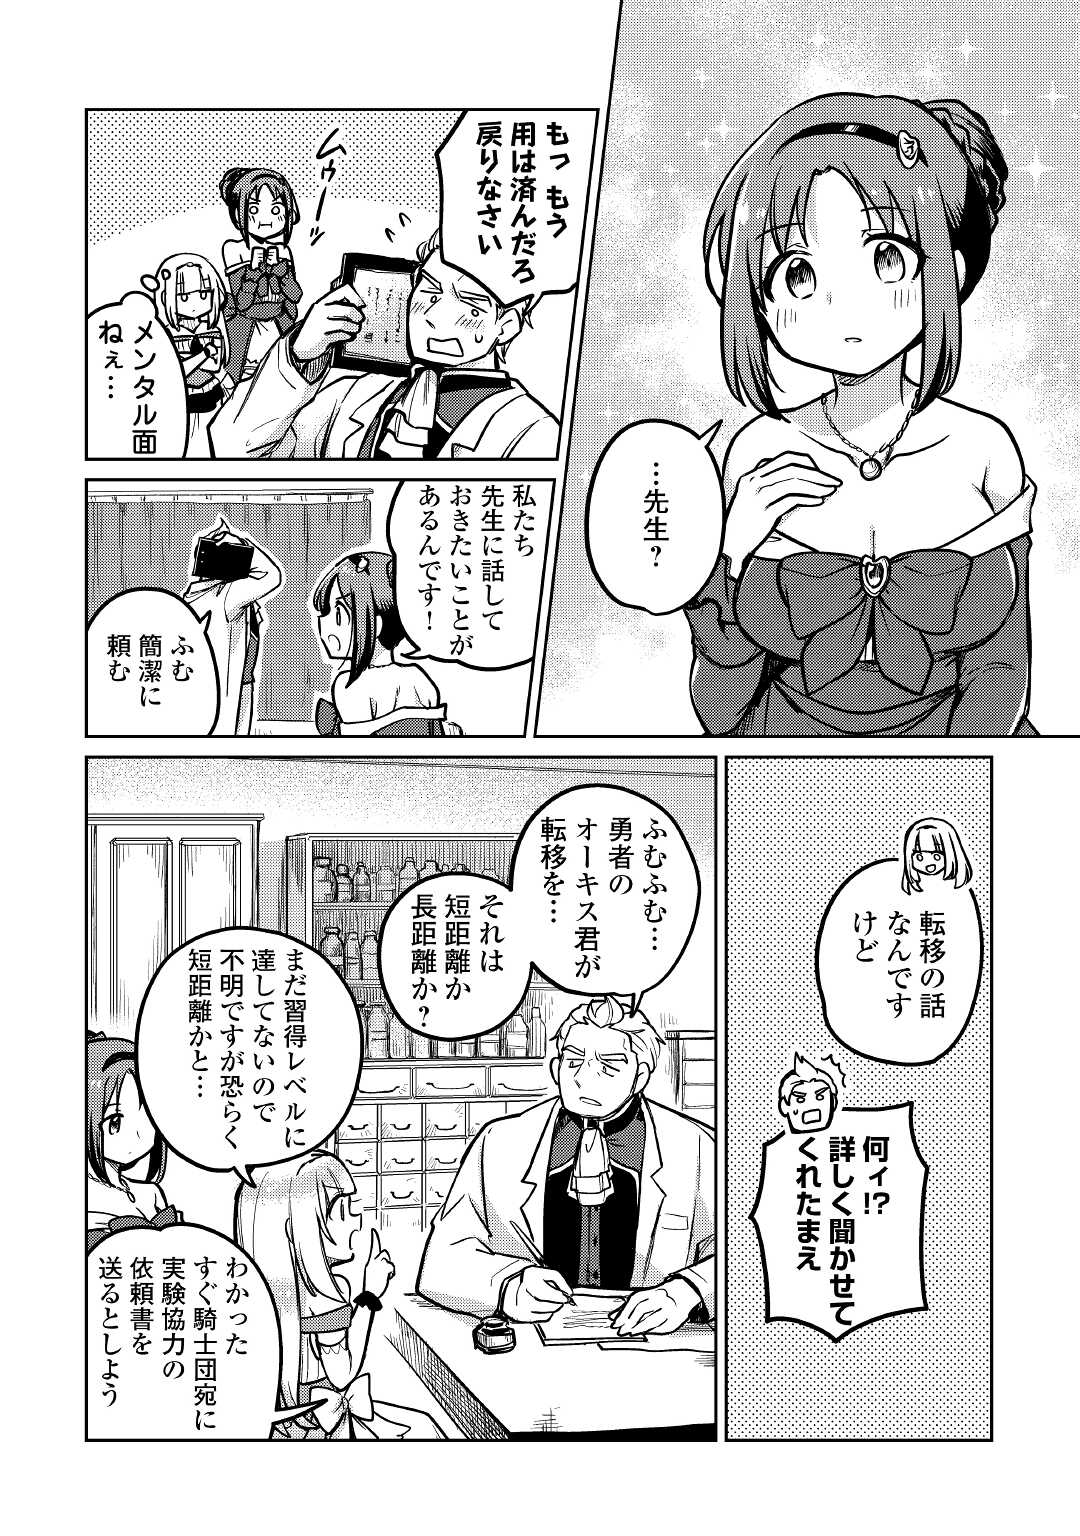 The Former Structural Researcher’s Story of Otherworldly Adventure 第42話 - Page 20